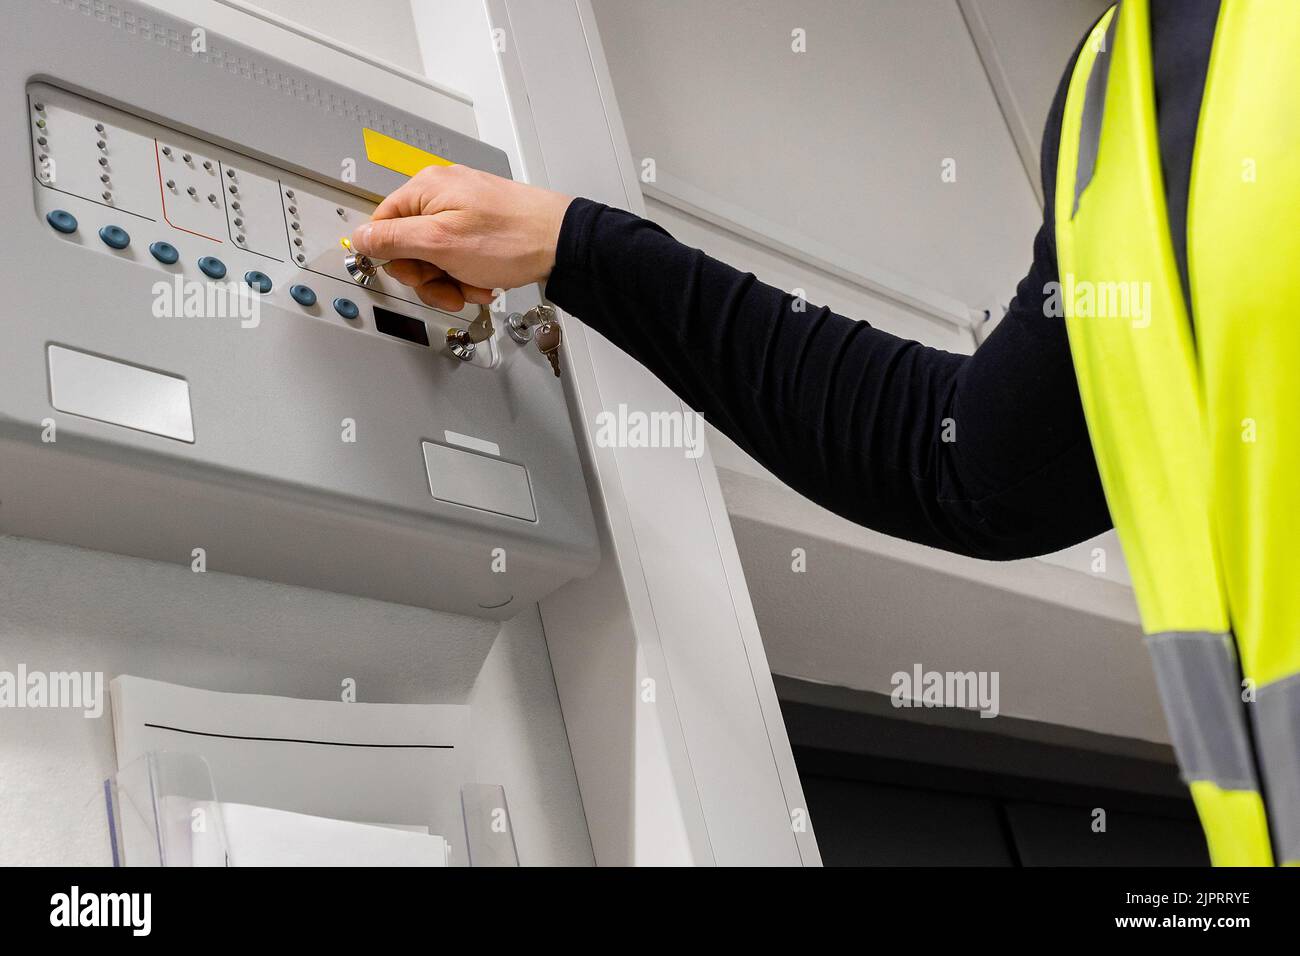 Close-up of electrician Opening Fire Panel In Server Room Stock Photo